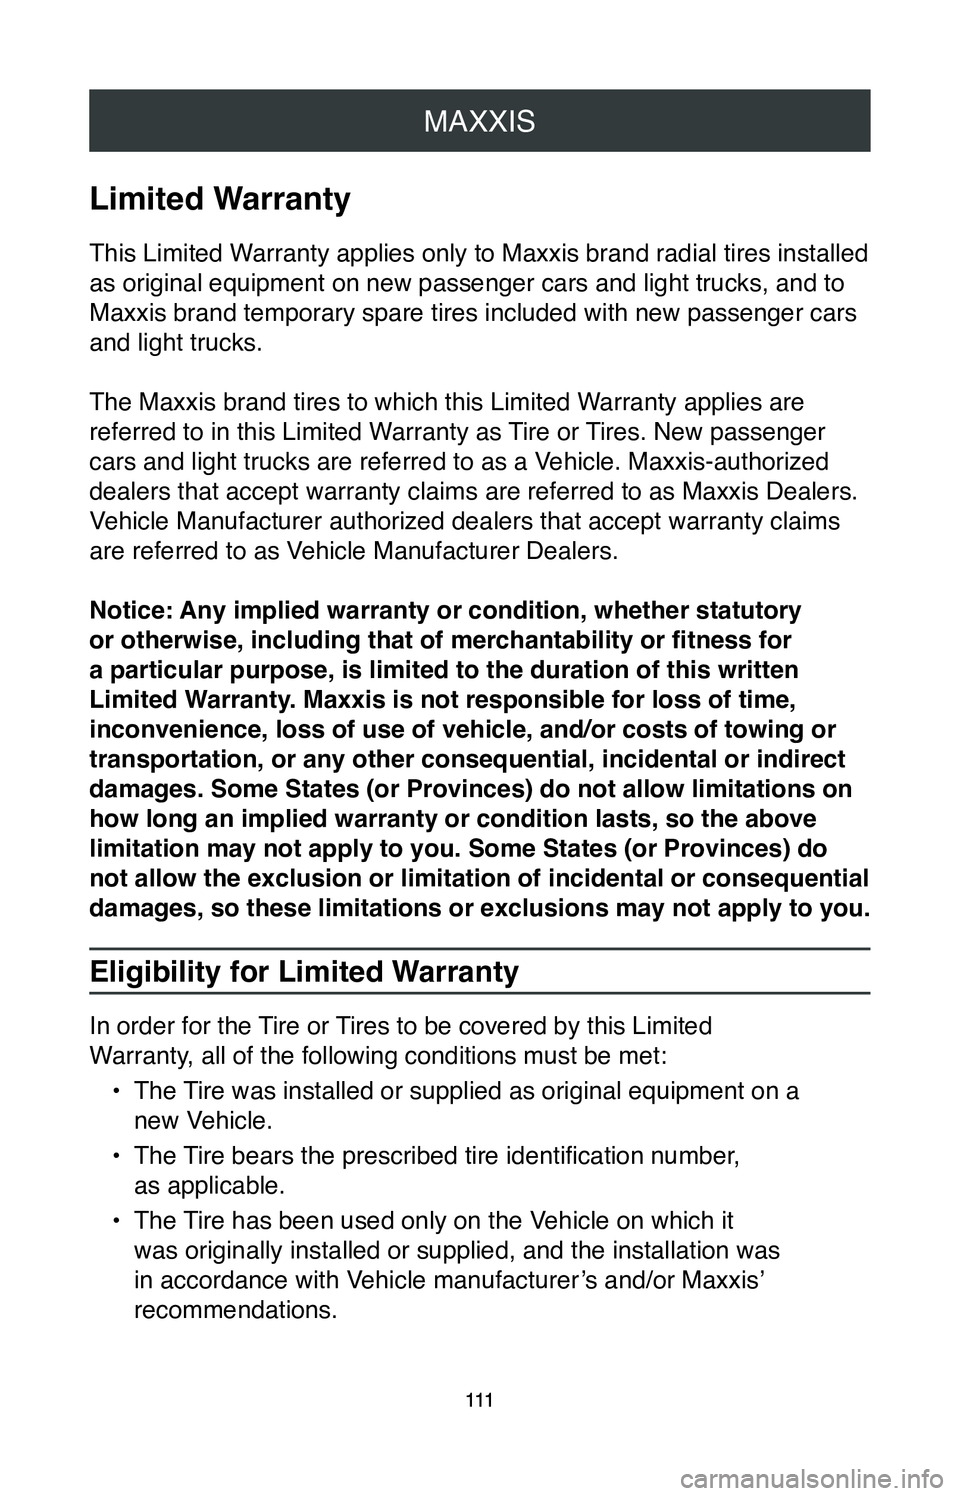 TOYOTA CAMRY 2020  Warranties & Maintenance Guides (in English) MAXXIS
111
MAXXIS
111
Limited Warranty
This Limited Warranty applies only to Maxxis brand radial tires installed 
as original equipment on new passenger cars and light trucks, and to 
Maxxis brand tem